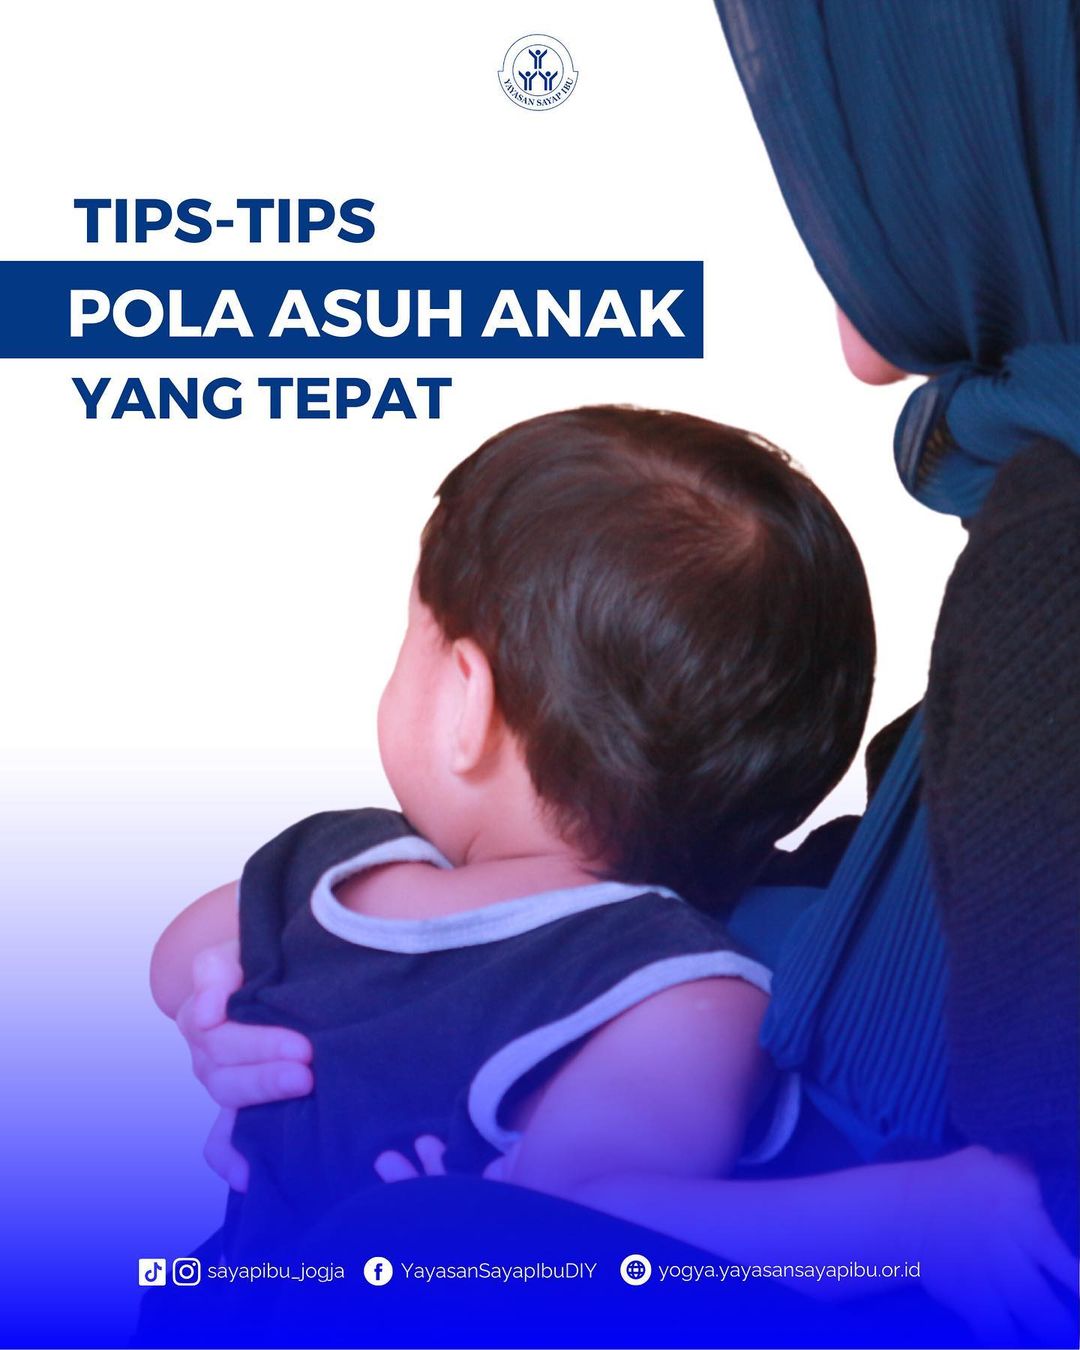 You are currently viewing Tips-Tips Pola Asuh Anak yang Tepat